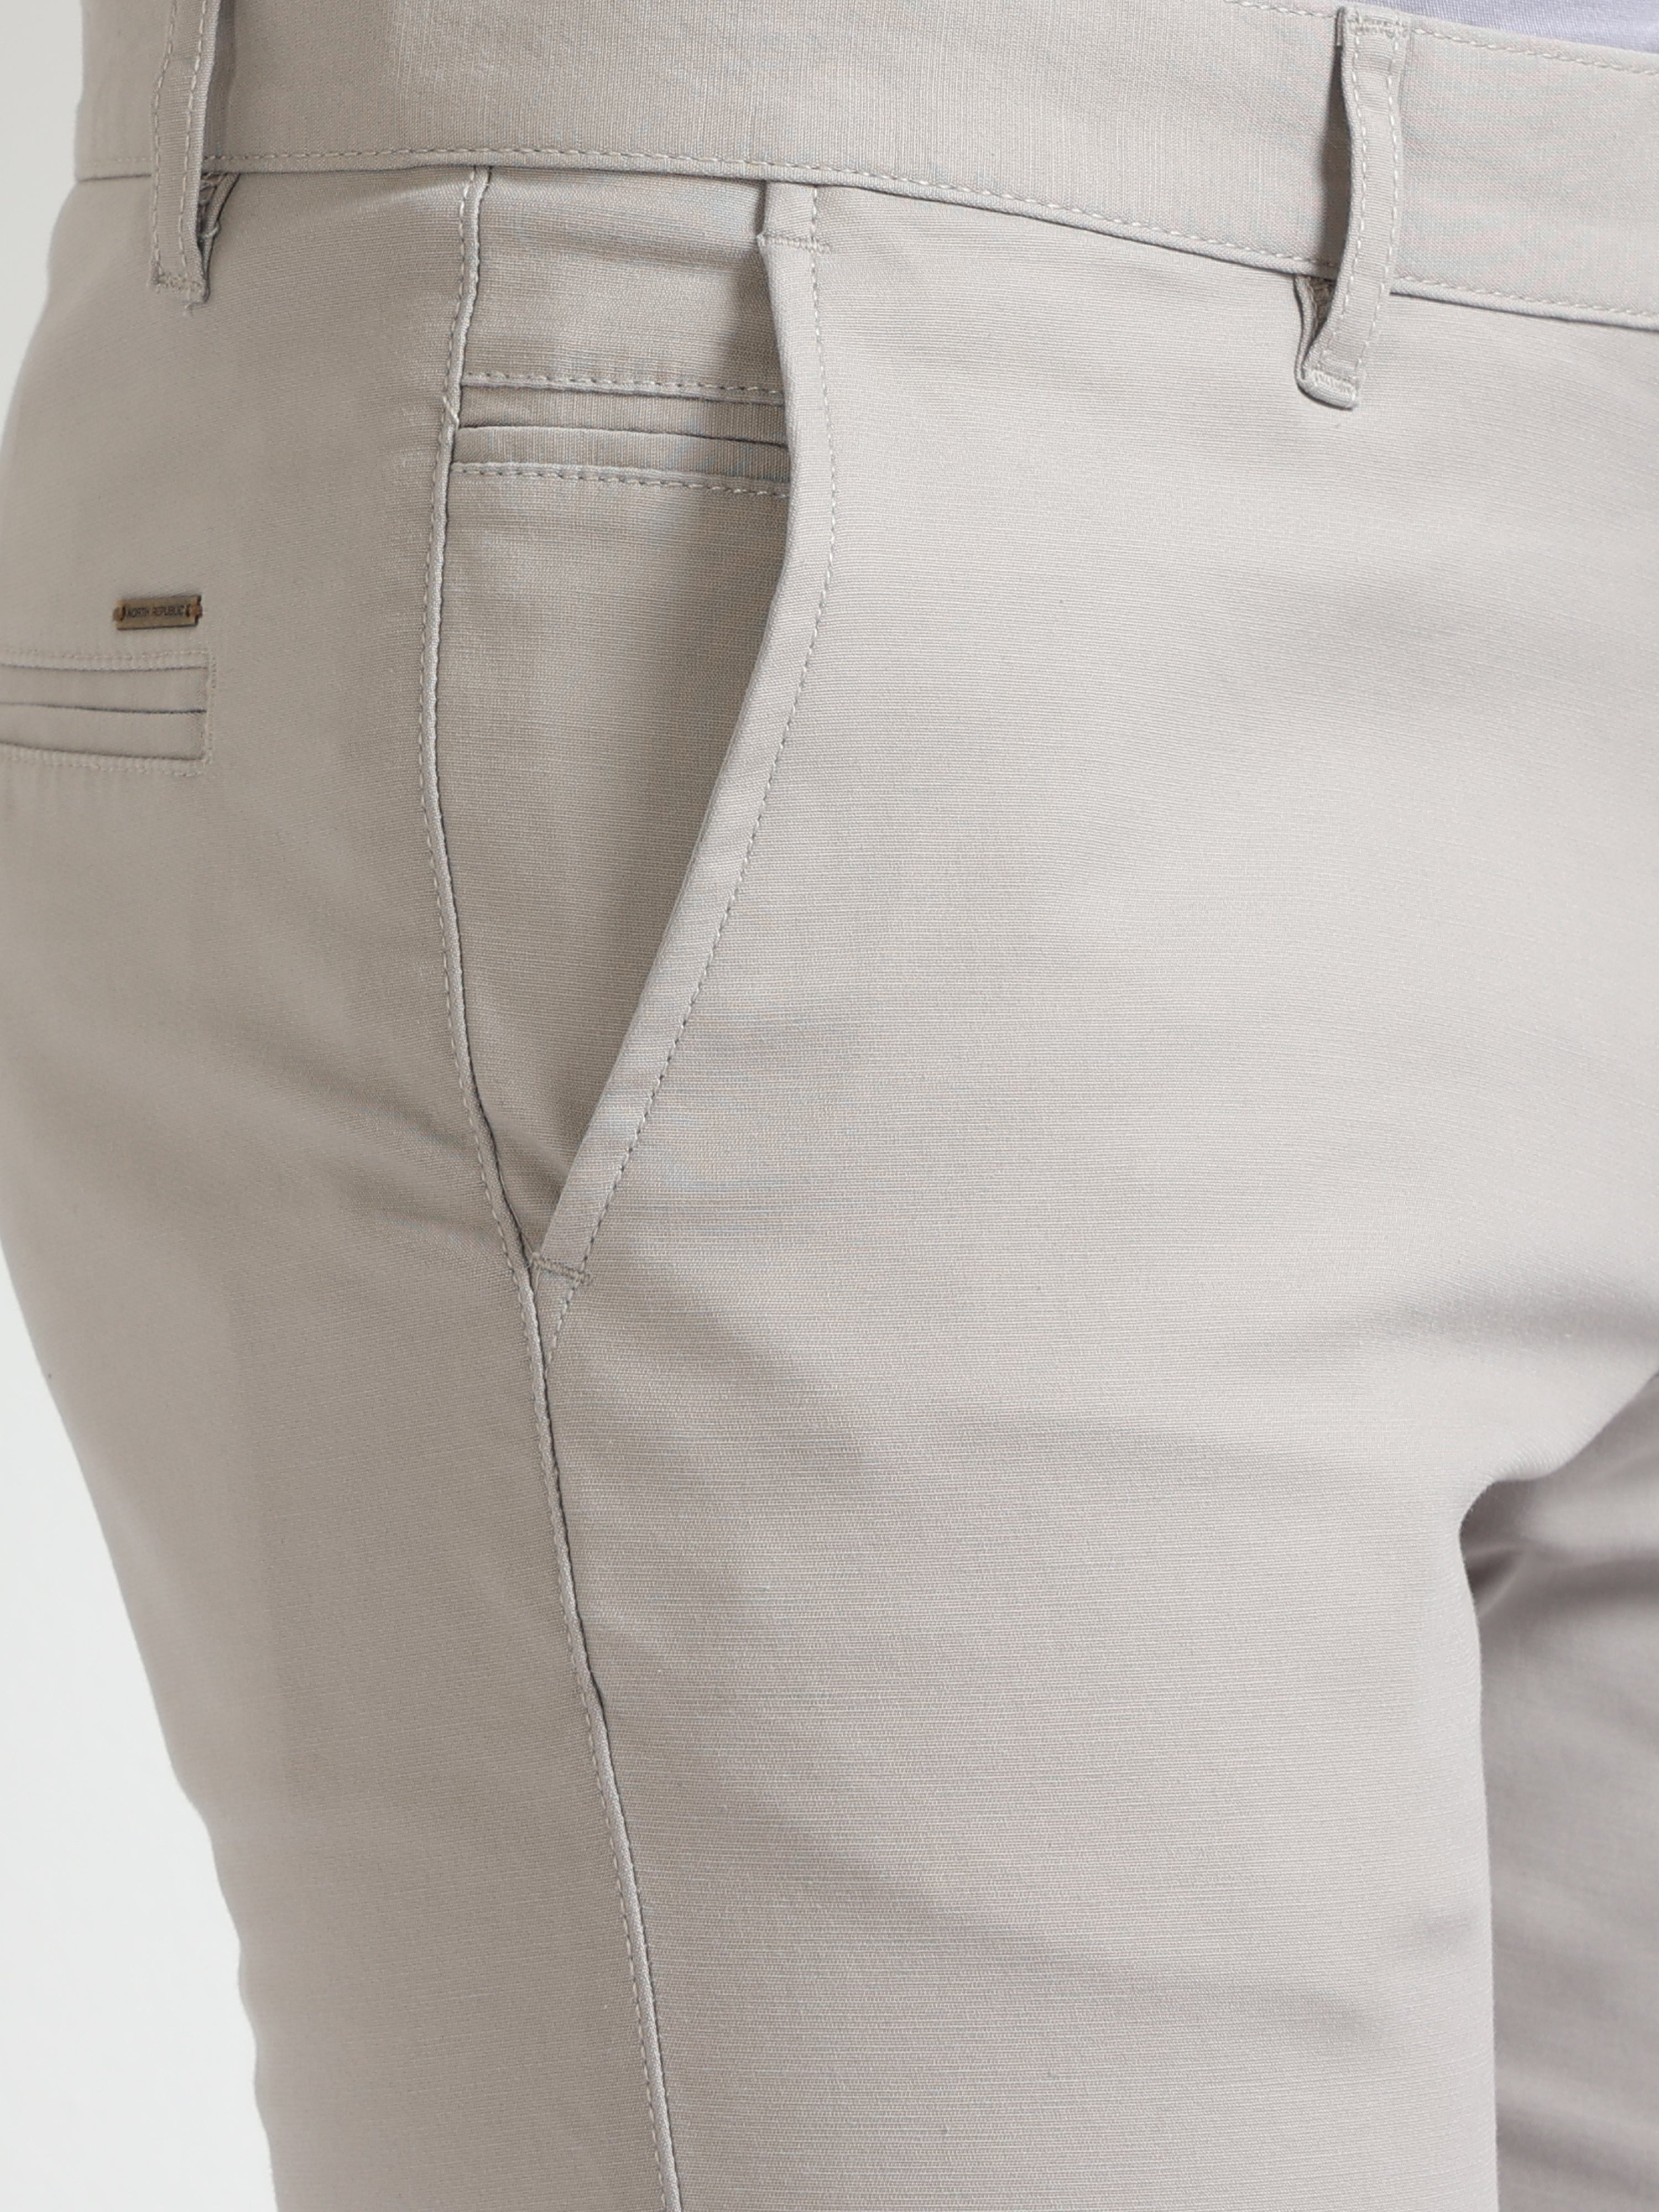 BASICS TAPERED FIT SEPIA BROWN COTTON STRETCH TROUSERS-23BTR50302